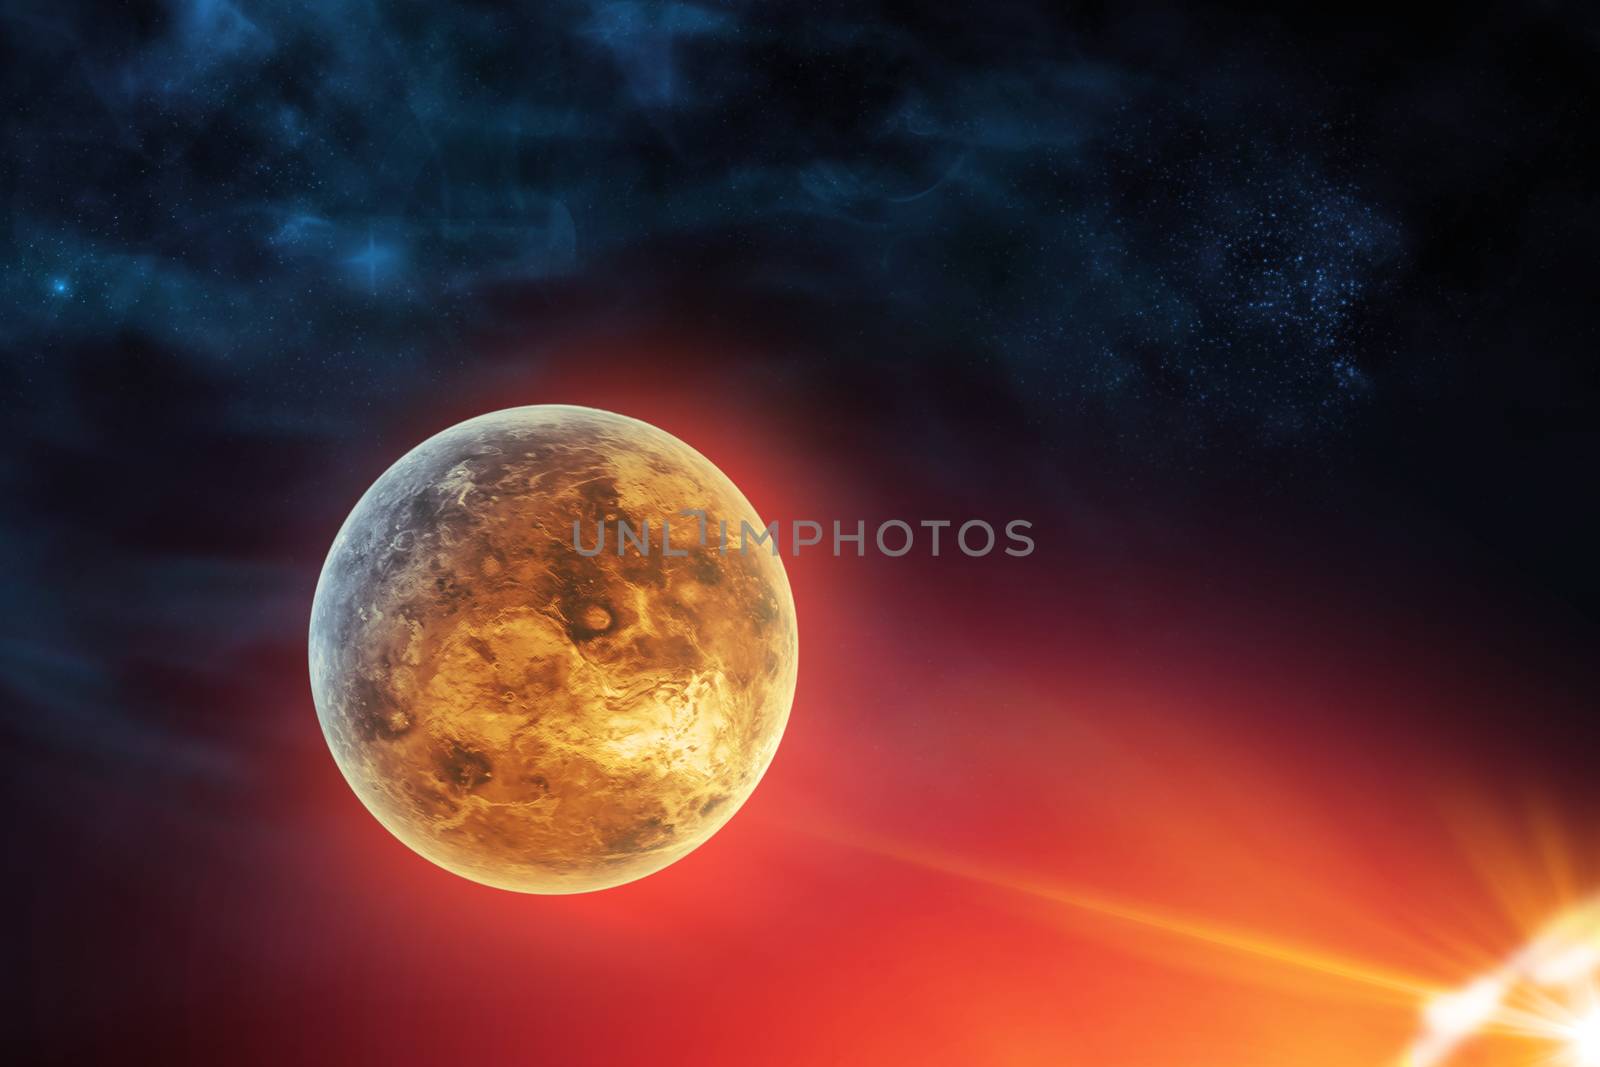 Celestial digital art, Venus planet in outer space near sun, stars and galaxies in outer space showing the beauty of space exploration. planet texture furnished by NASA, 